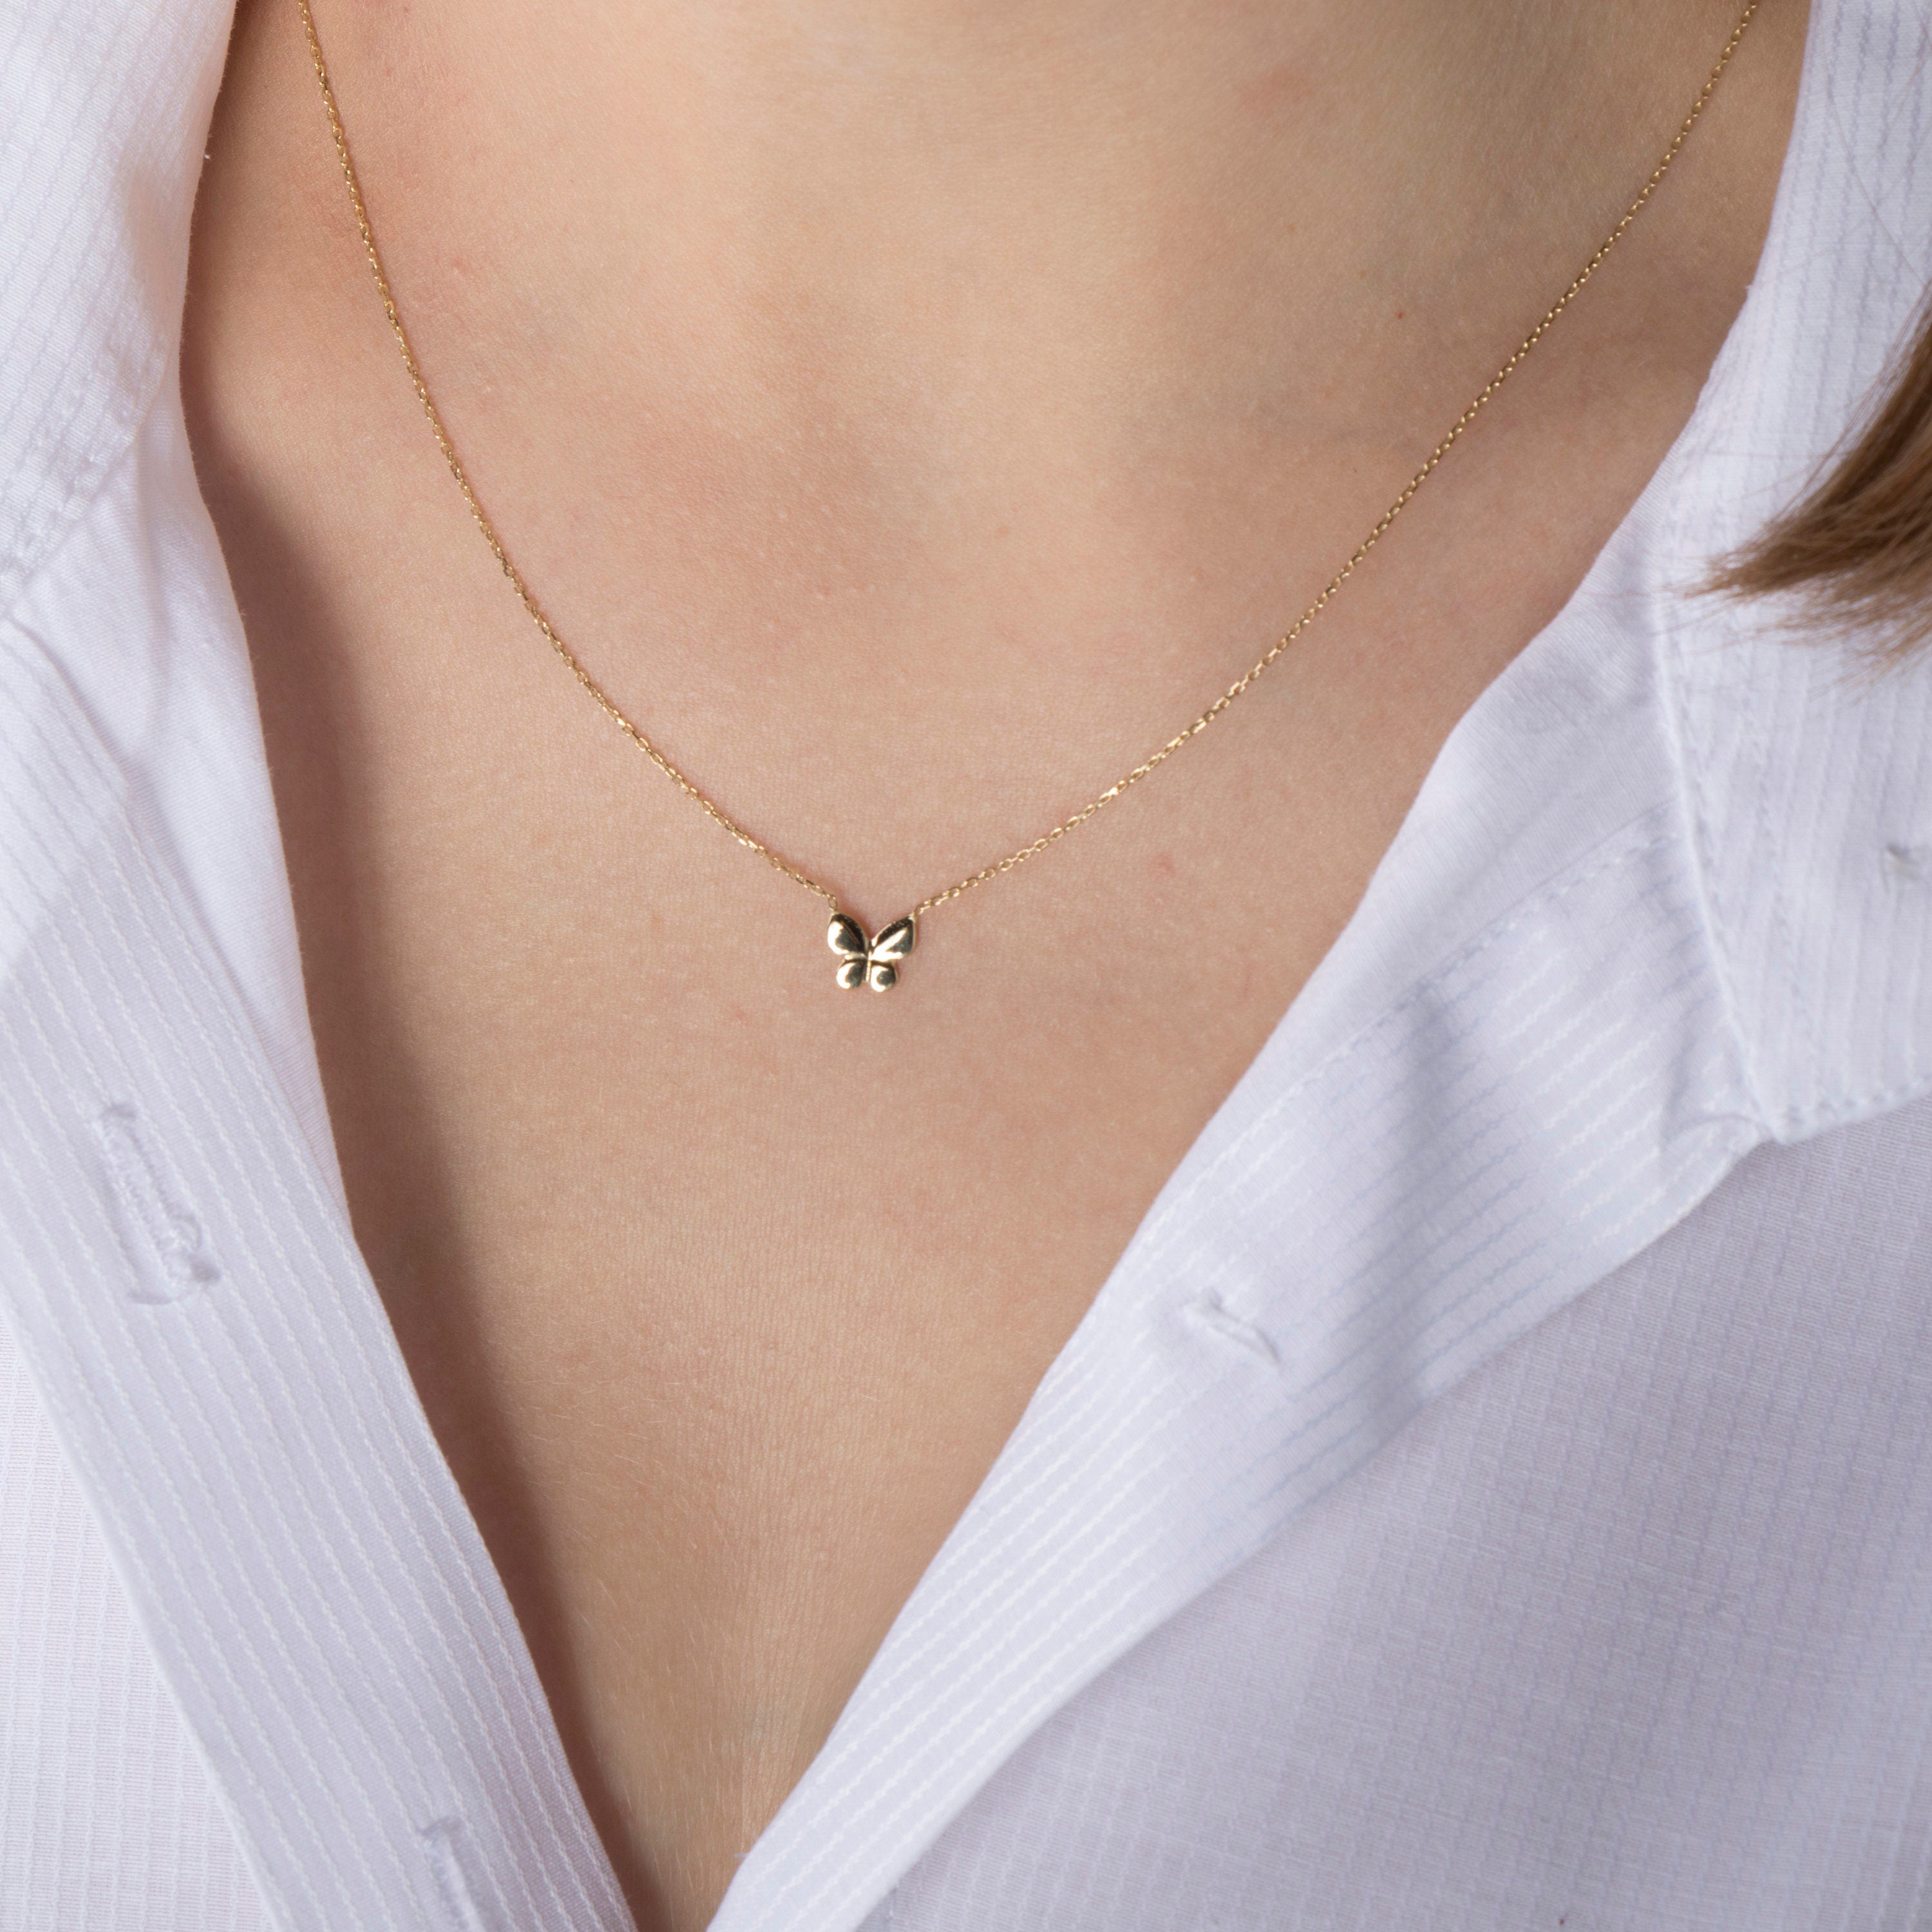 14k Gold Butterfly Necklace/Dainty Tiny Butterfly Necklace in 14K Solid Gold